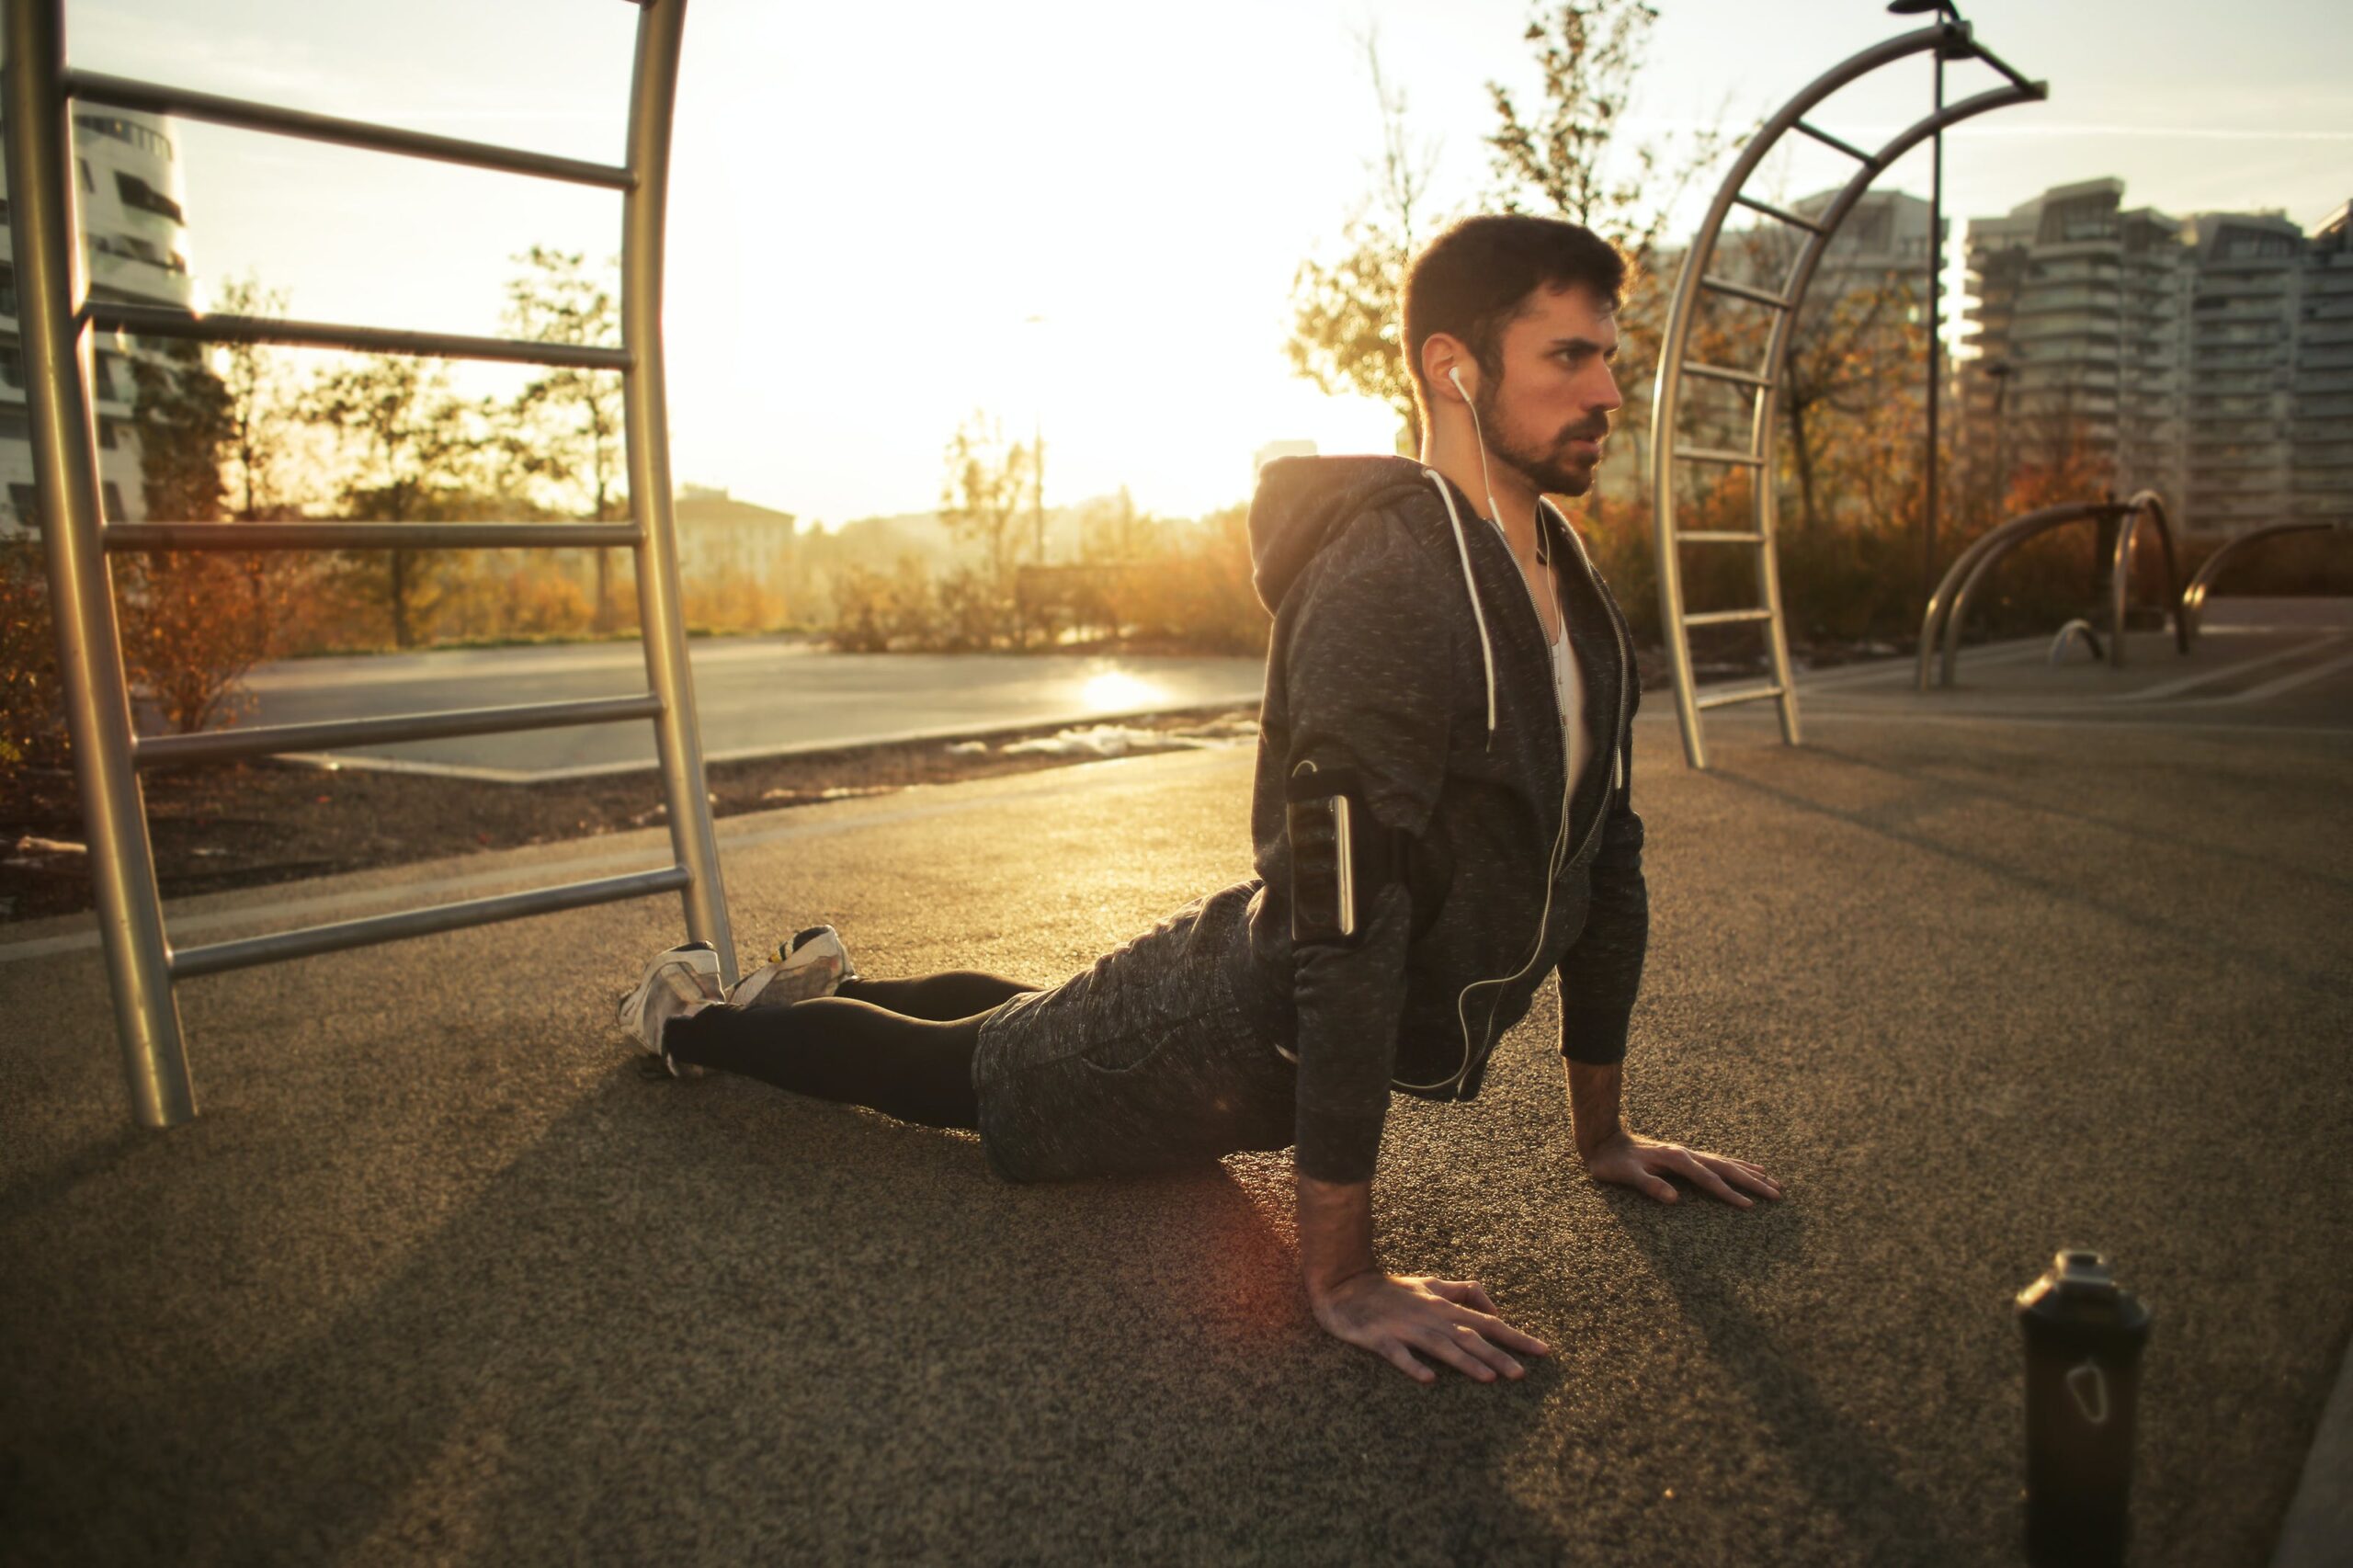 A man does yoga during a morning exercise, showing the importance of fitness therapy for addiction recovery